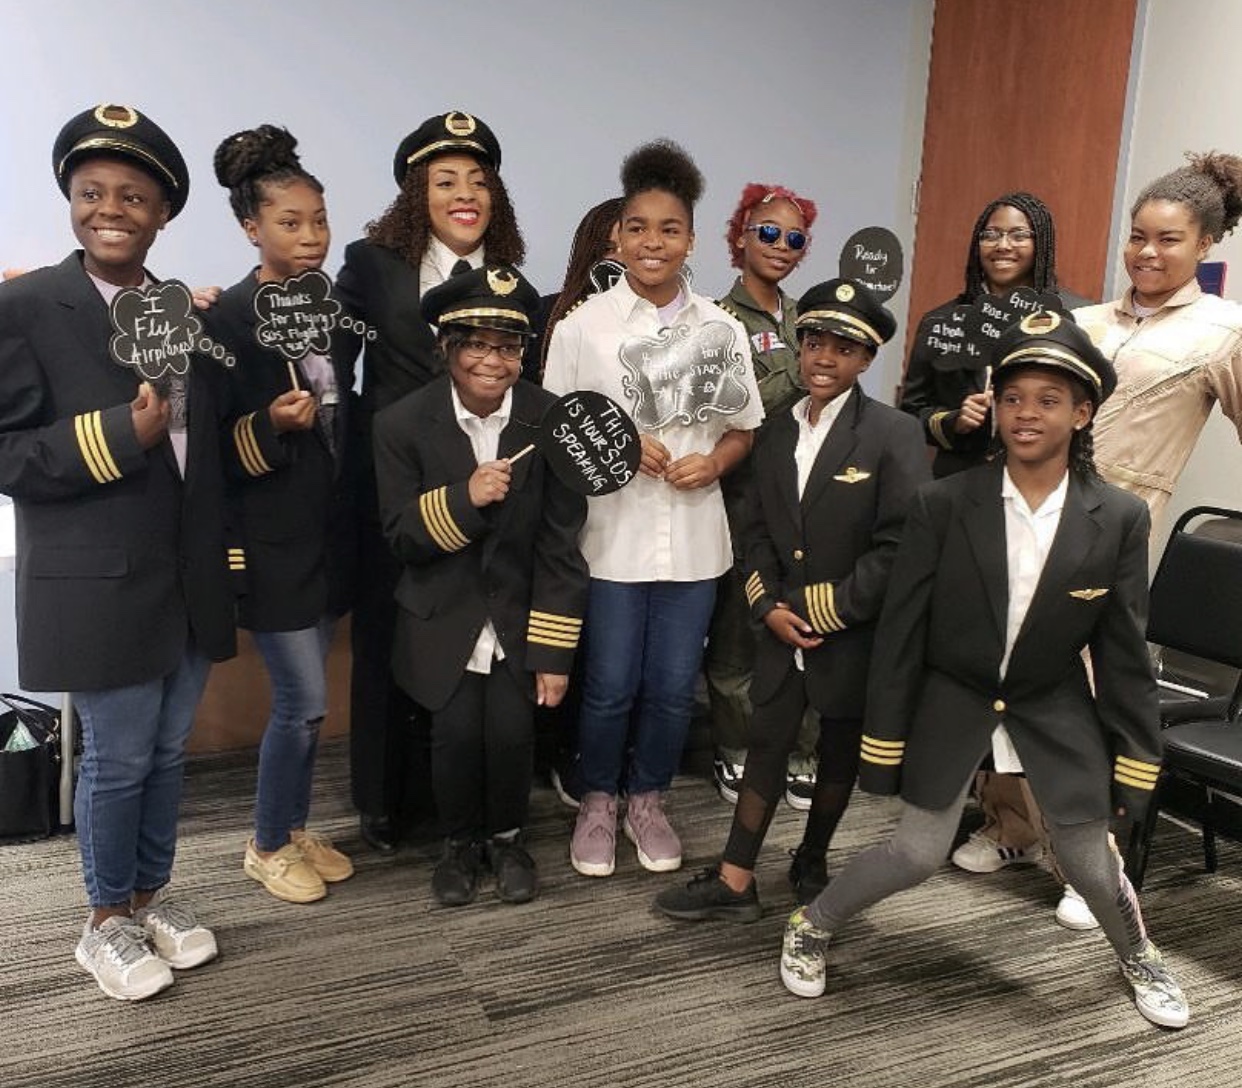 'Girls Rock Wings' Aims To Expose Black Girls To Aviation